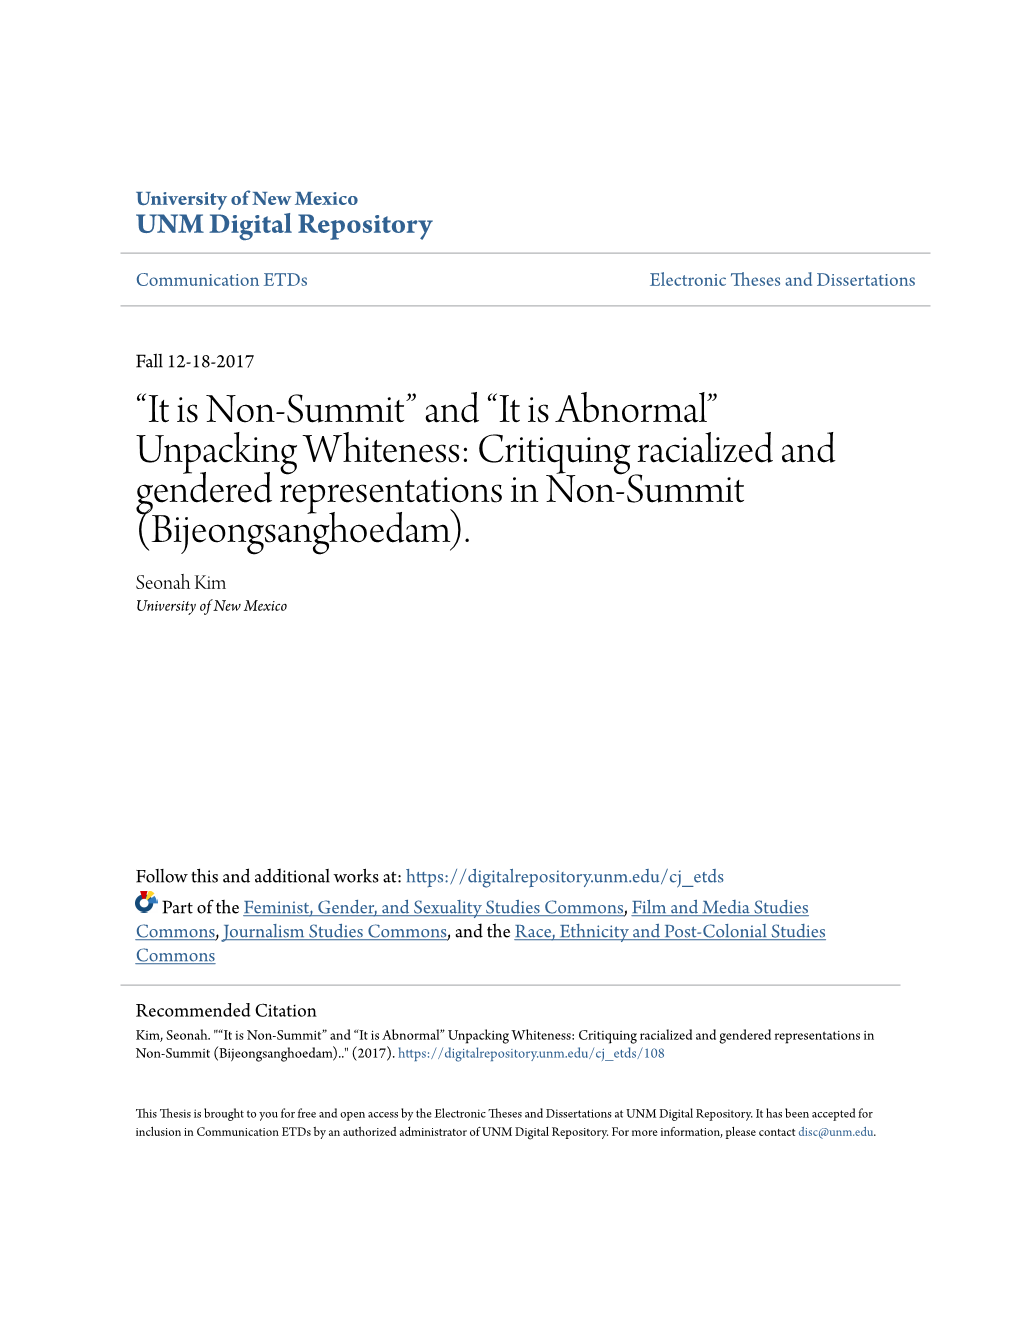 It Is Non-Summit” and “It Is Abnormal” Unpacking Whiteness: Critiquing Racialized and Gendered Representations in Non-Summit (Bijeongsanghoedam)